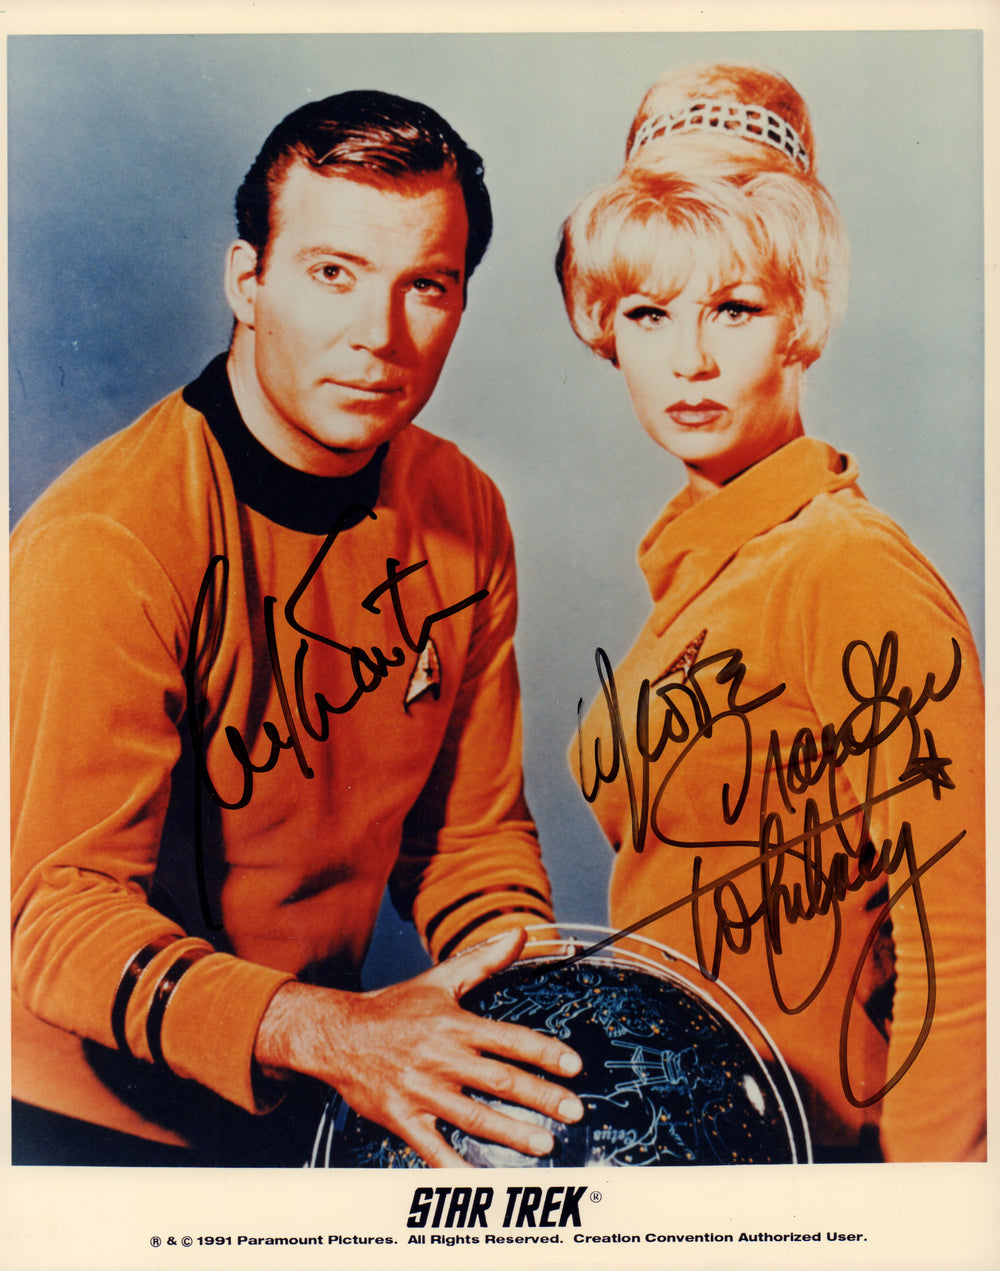 William Shatner as Captain Kirk with Grace Lee Whitney as Janice Rand in Star Trek: The Original Series Signed 8x10 Photo